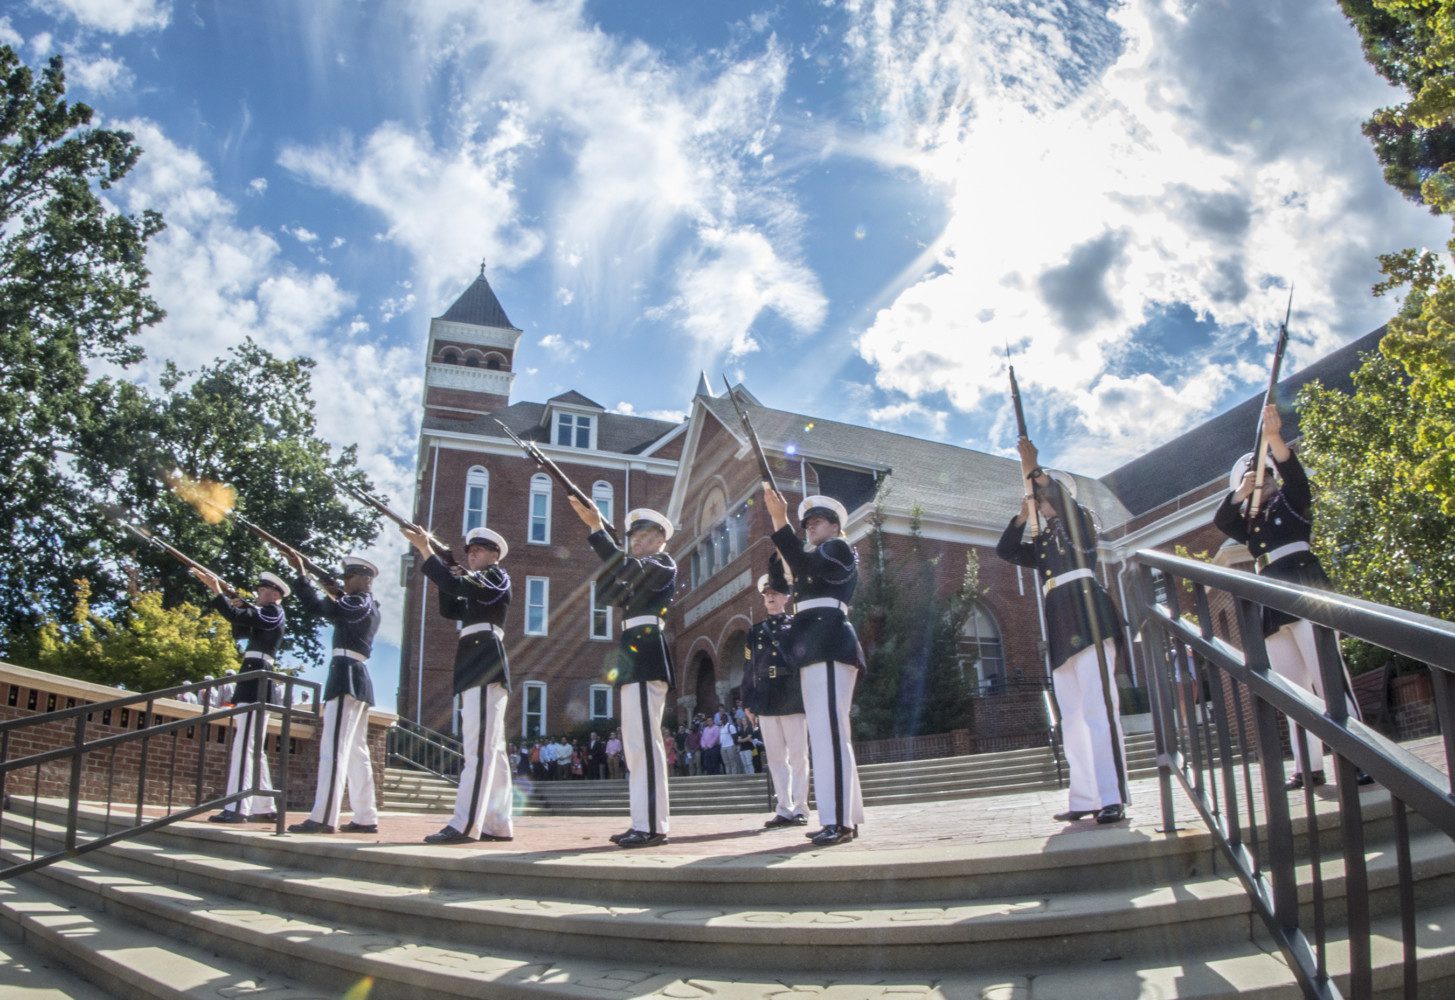 Five Army cadets in dress blue uniforms stand in formation in front of Tillman Hall, pointing rifles up towards the upper left corner of the frame and firing.